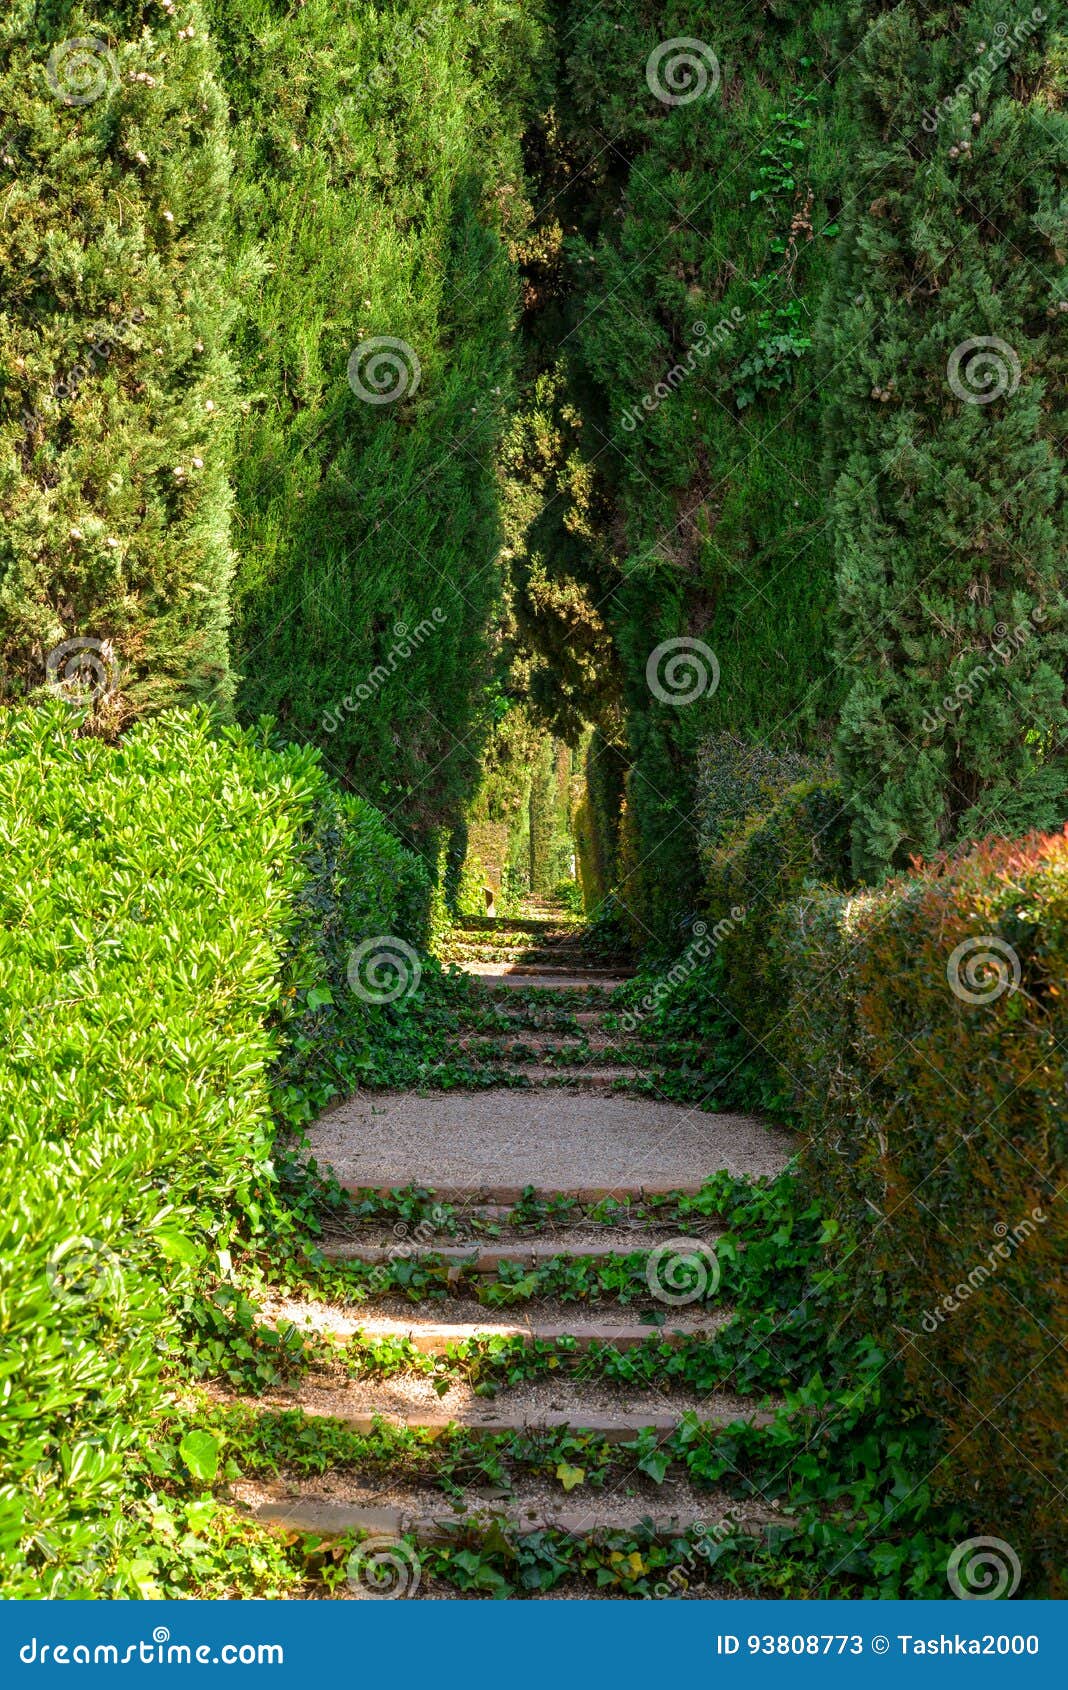 Staircase covered with ivy stock image. Image of garden - 93808773